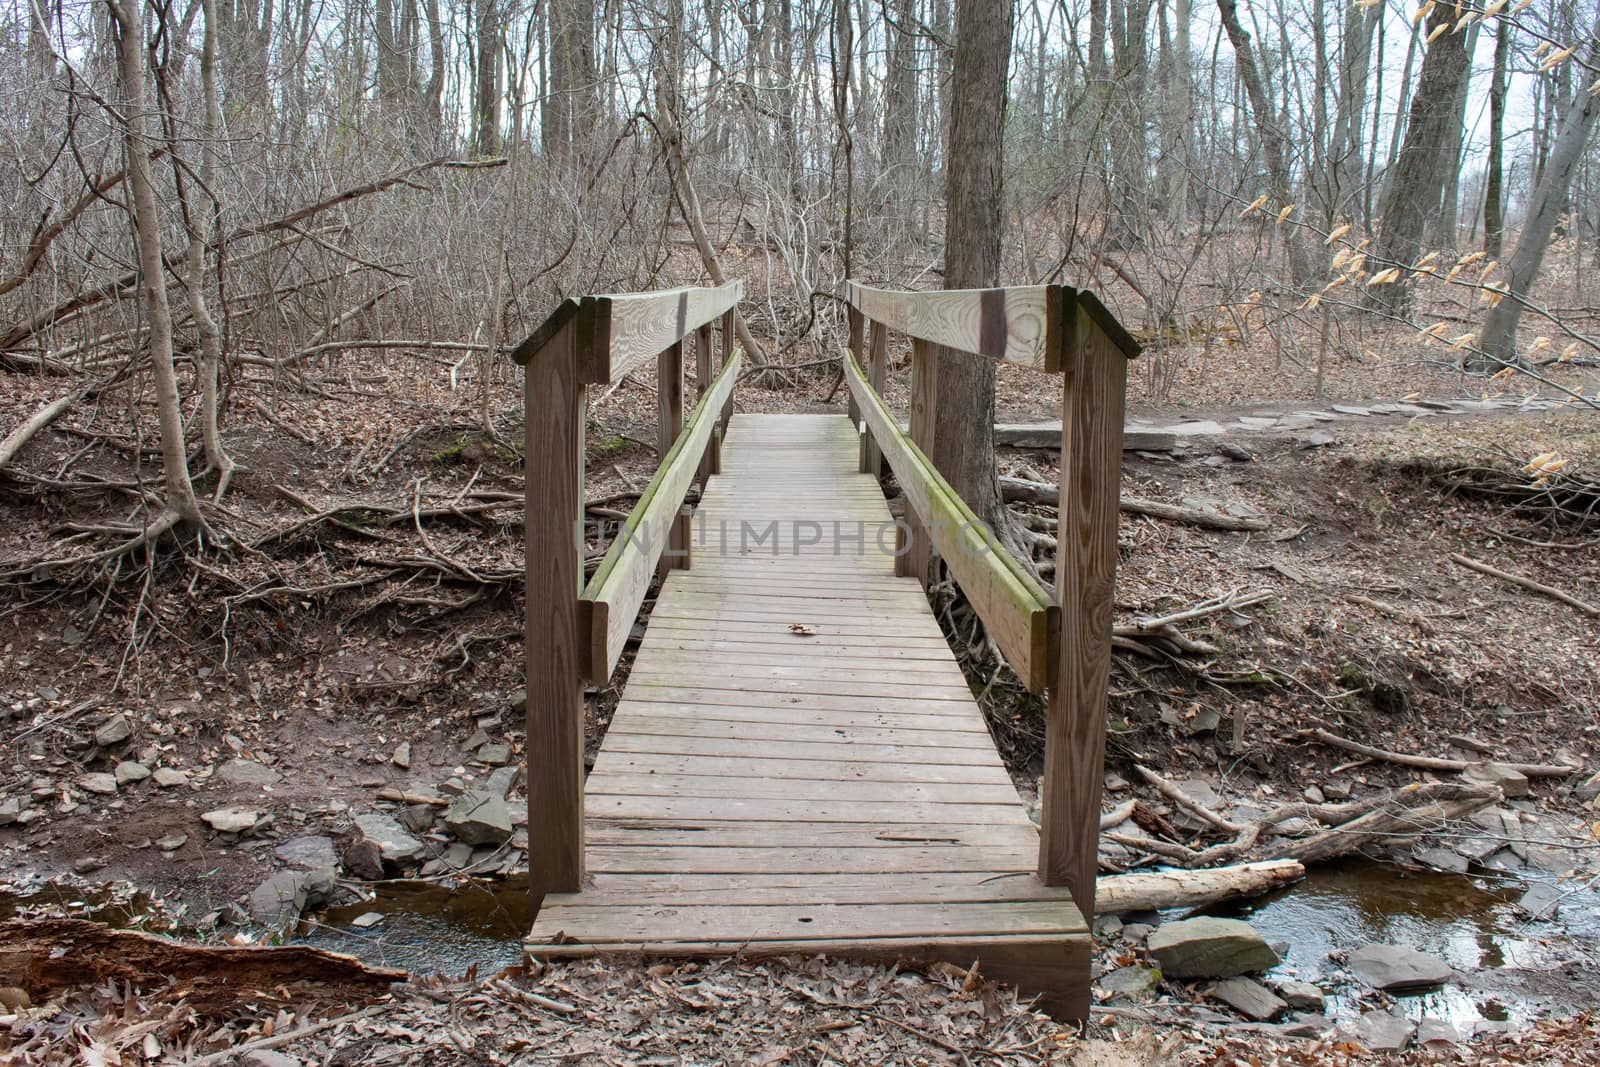 A Wooden Bridge Crossing a Shallow Creek in a Dead Winter Forest by bju12290